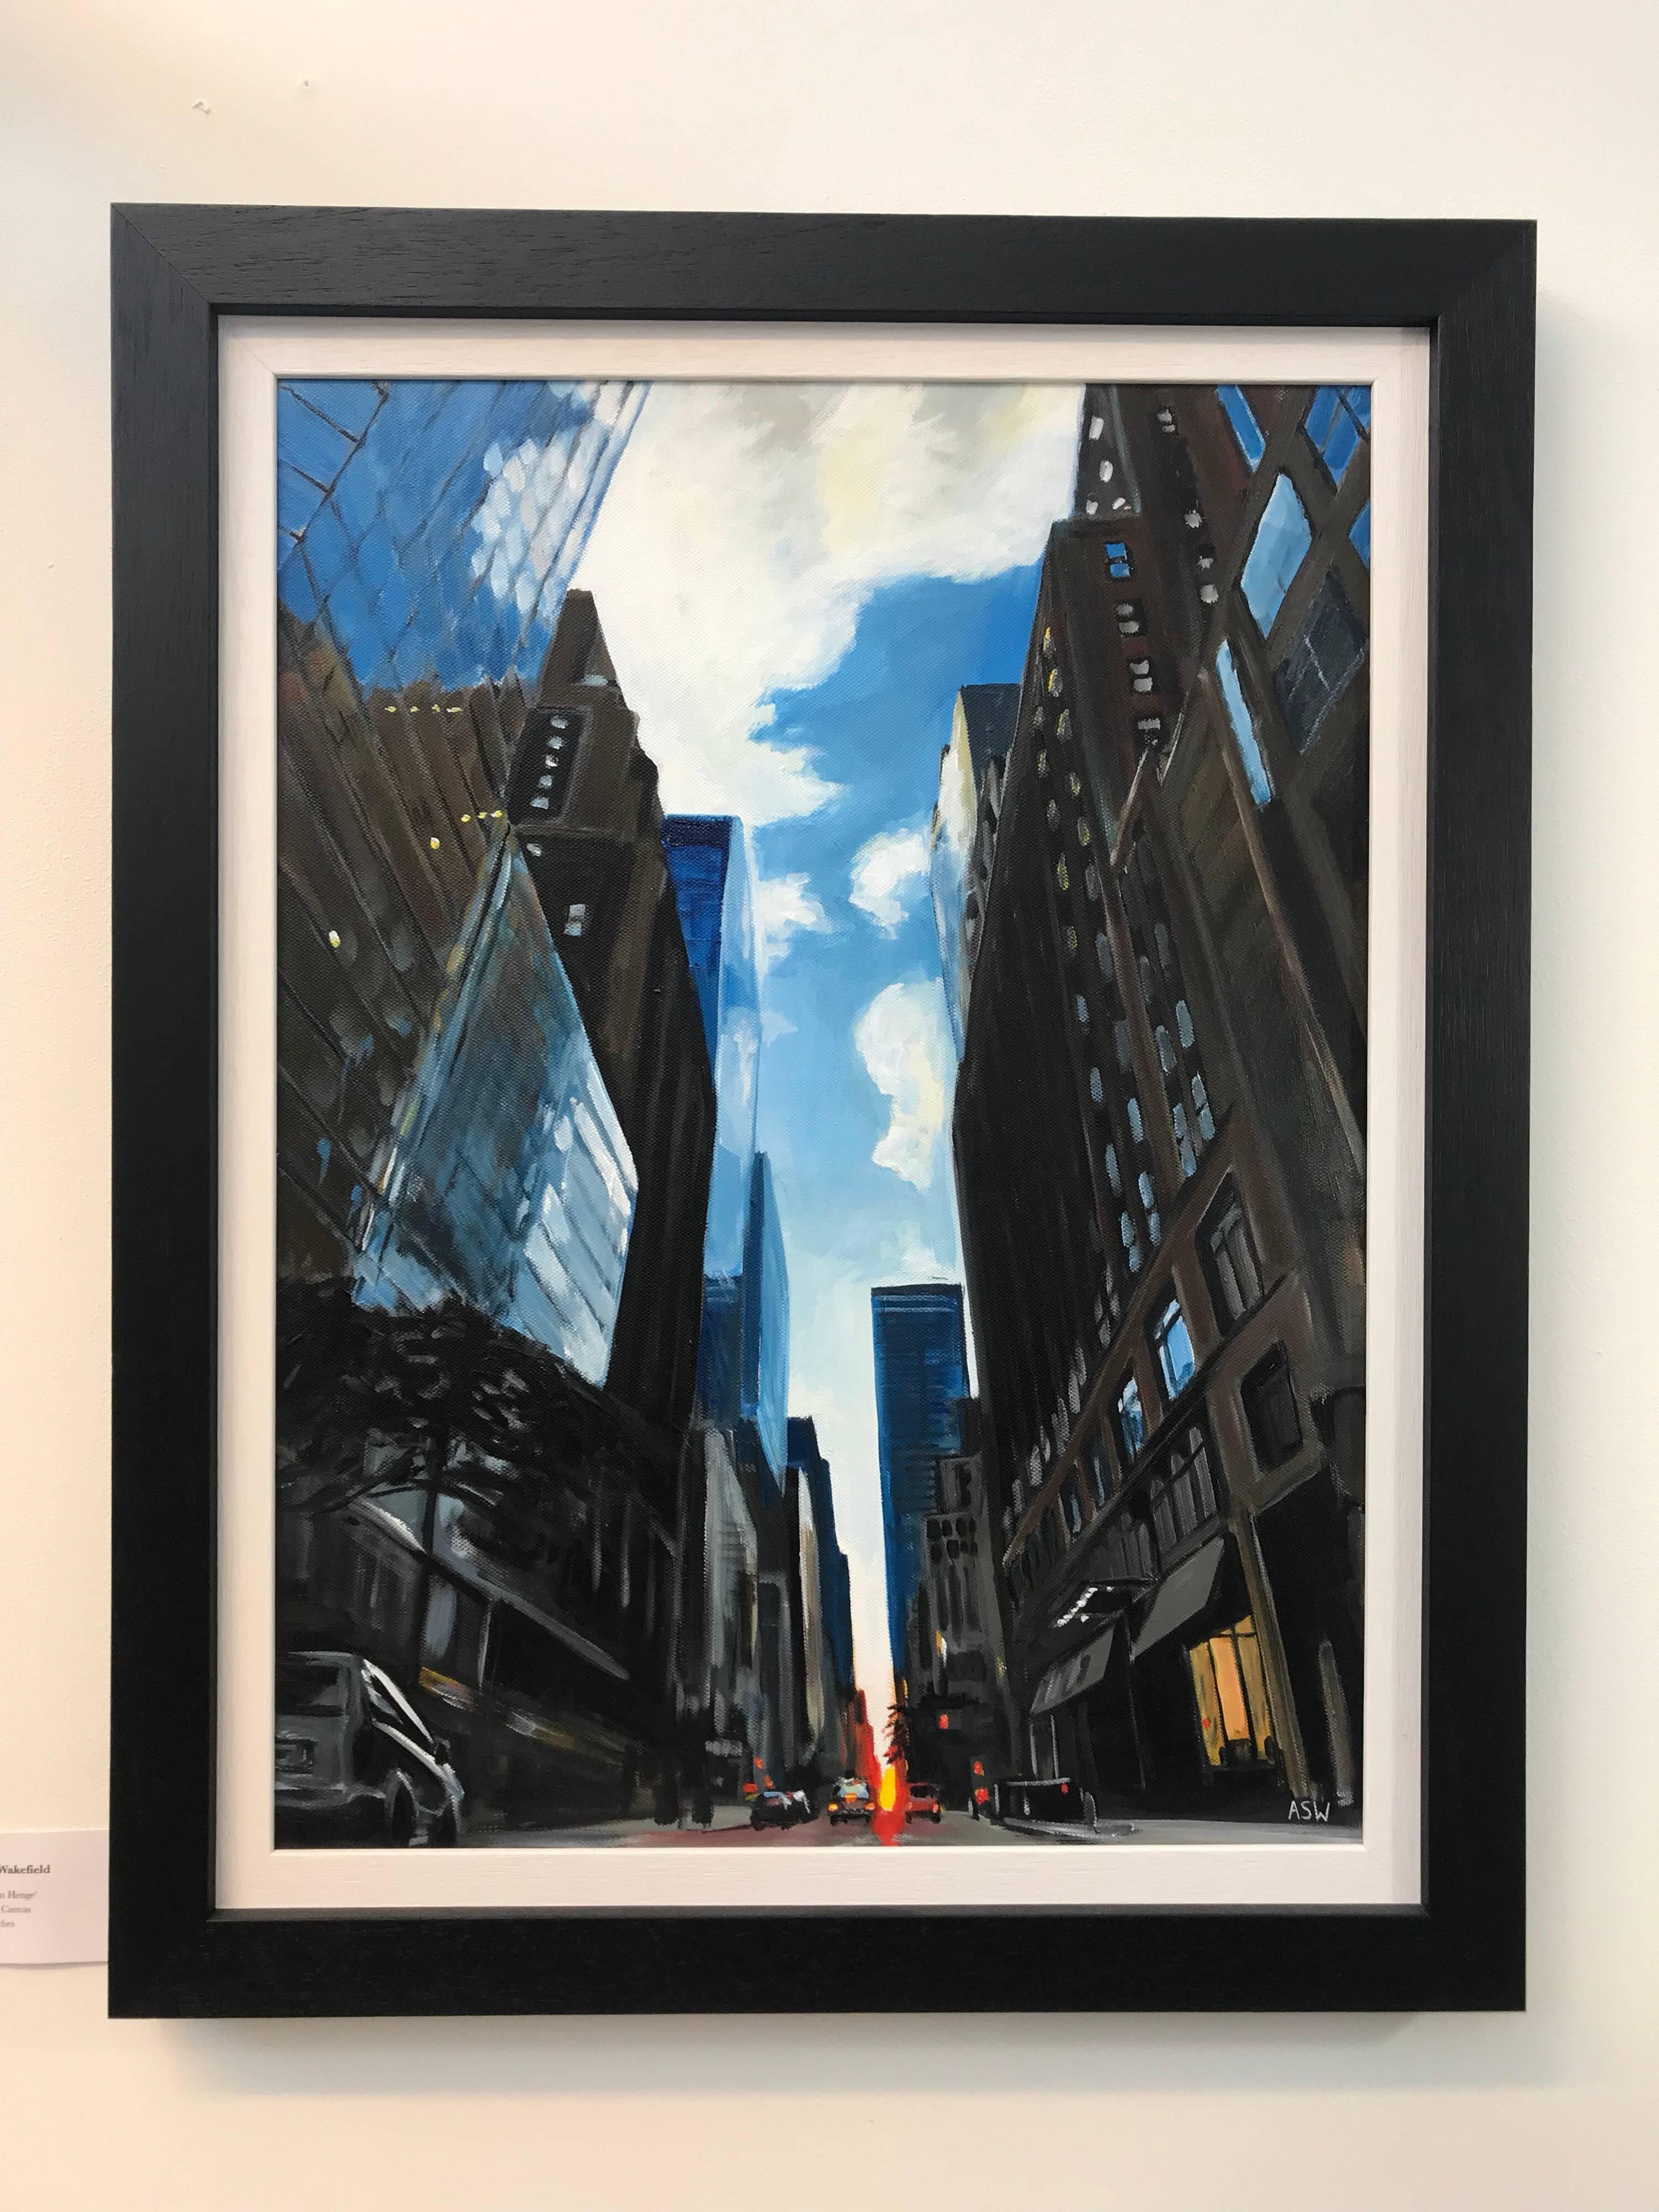 Painting of Summer Sunset in New York City by Leading British Urban Artist UK 4